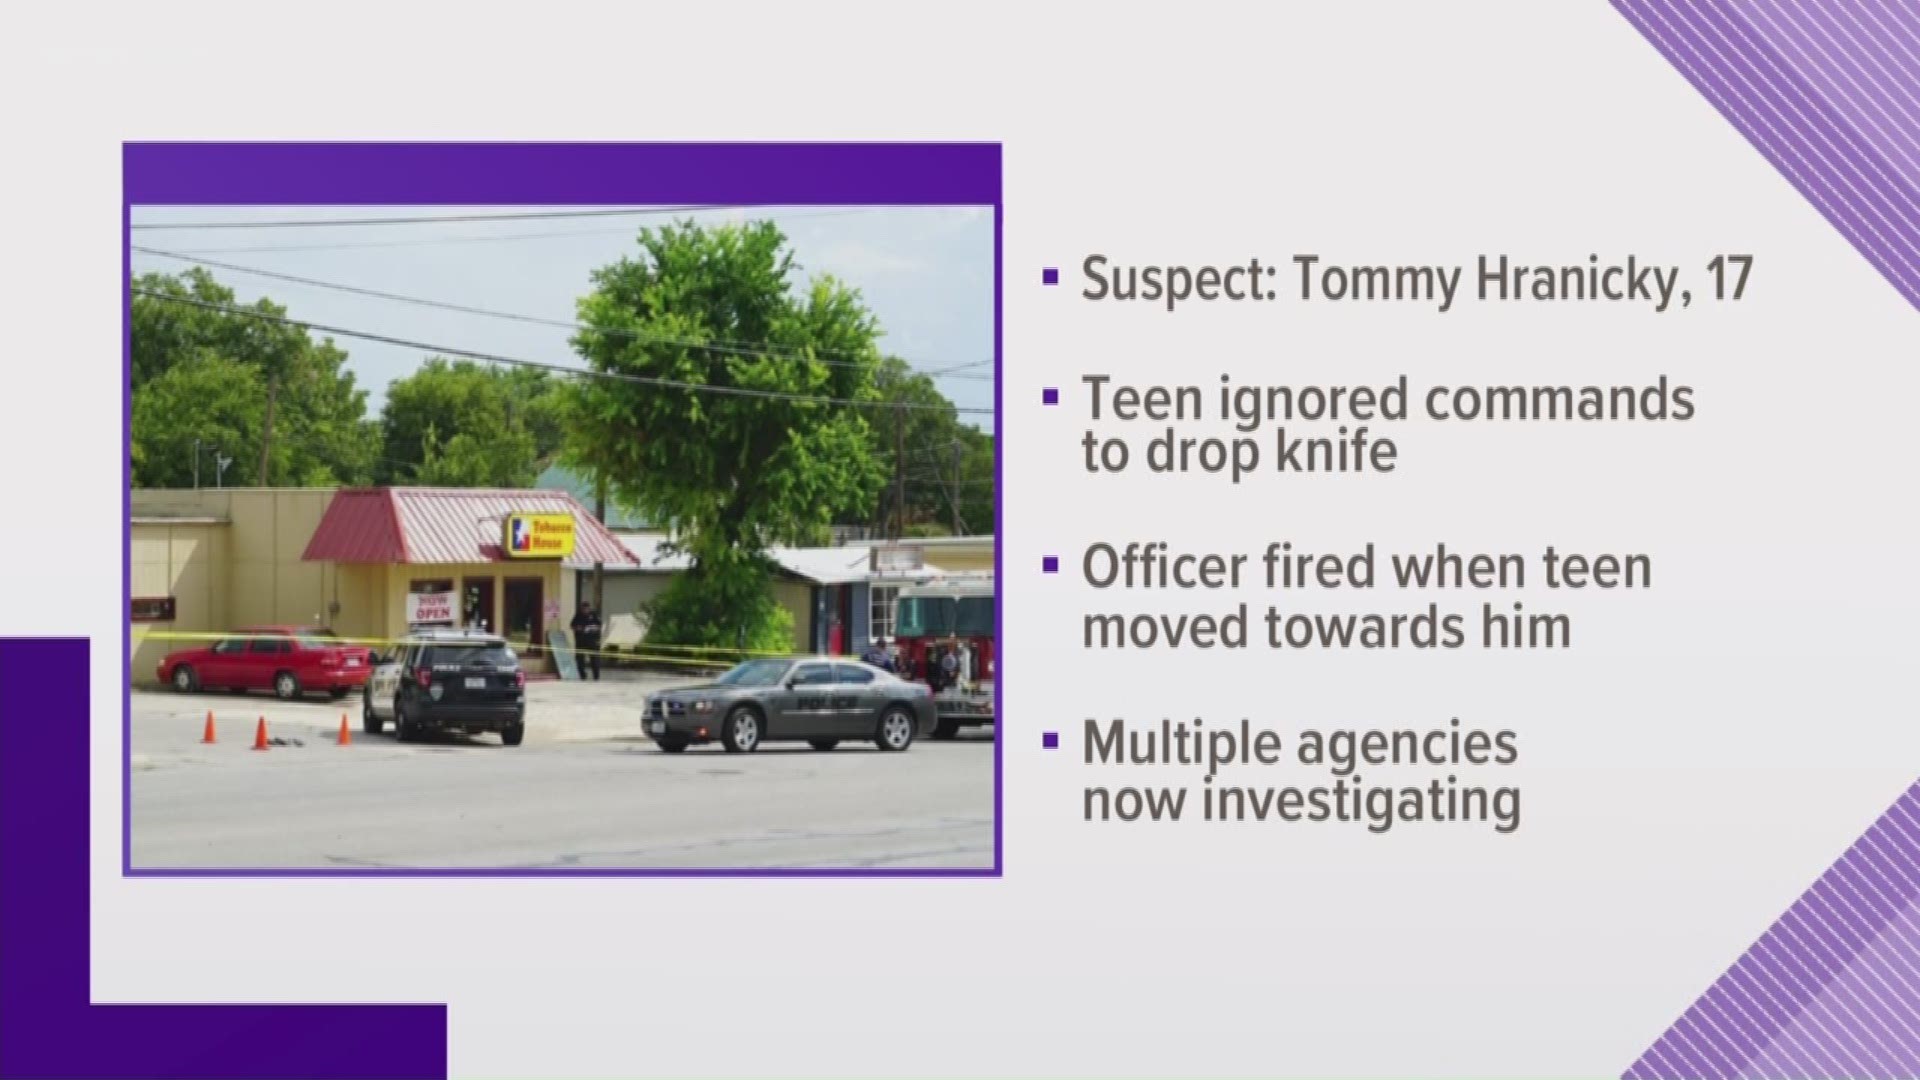 Police said the teen ignored several commands to drop the knife. When the suspect moved toward the officer, he opened fire, killing Tommy Hranicky.